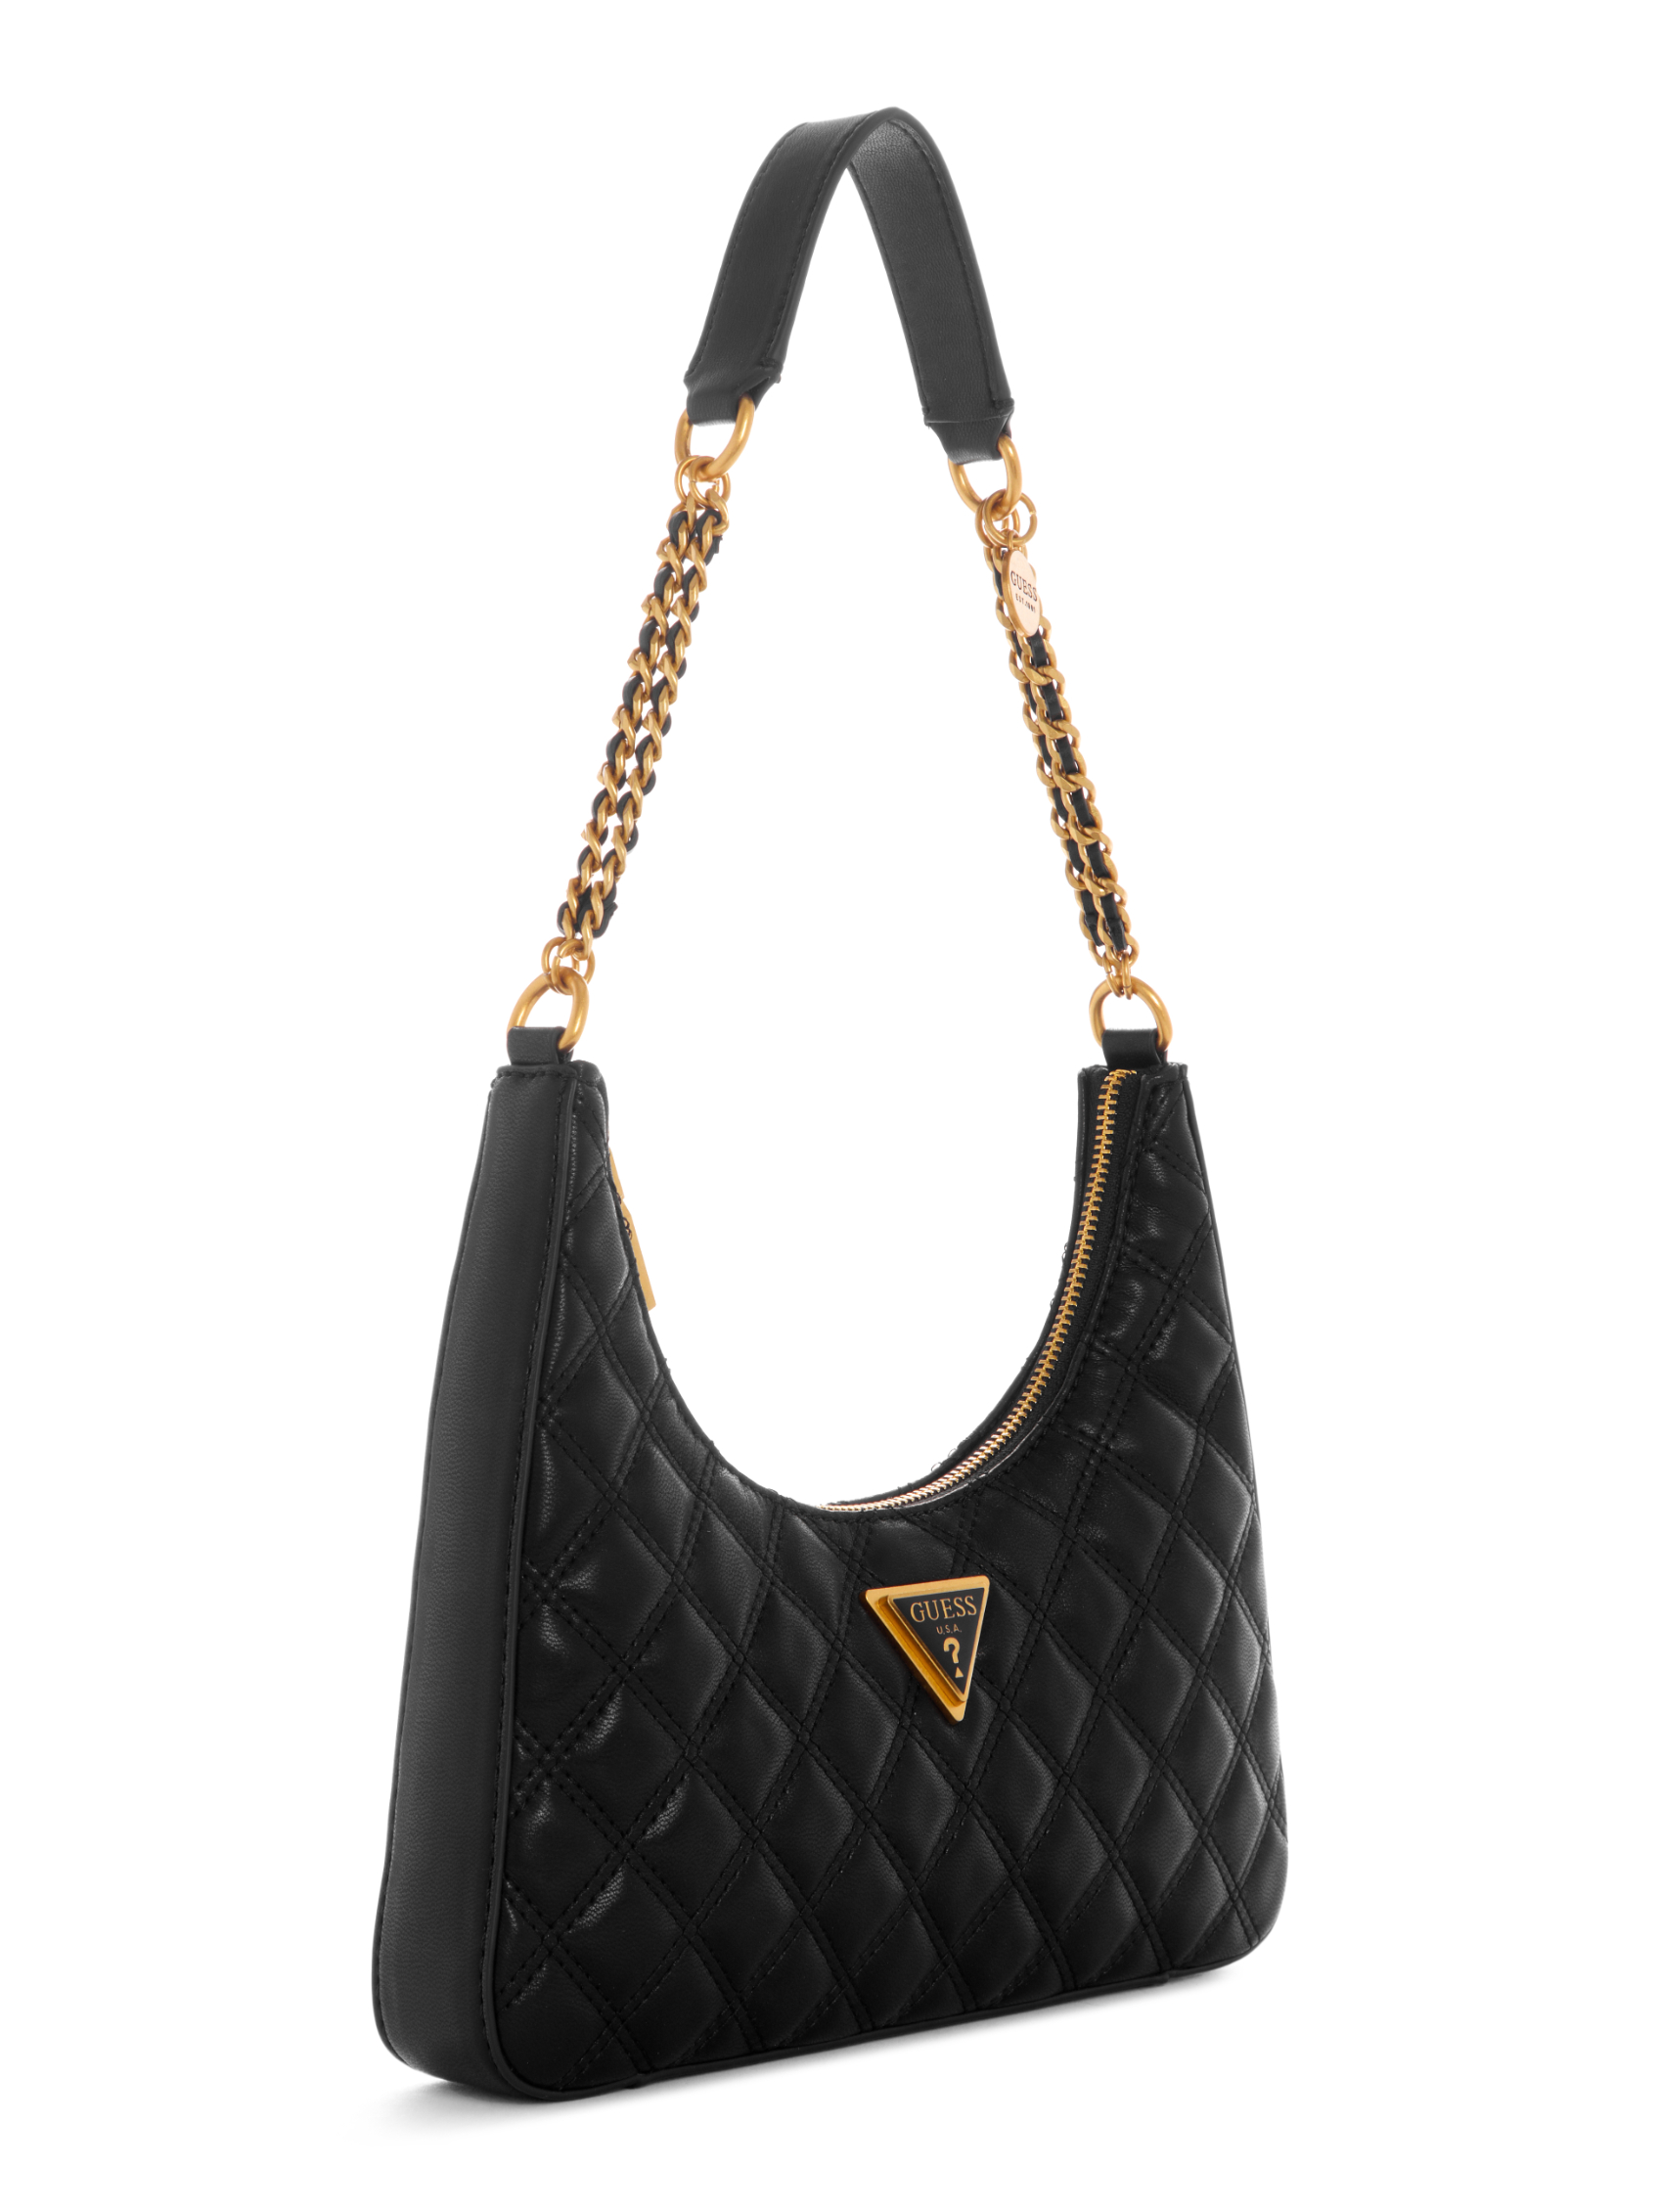 GIULLY TOP ZIP SHOULDER BAG | Guess Philippines